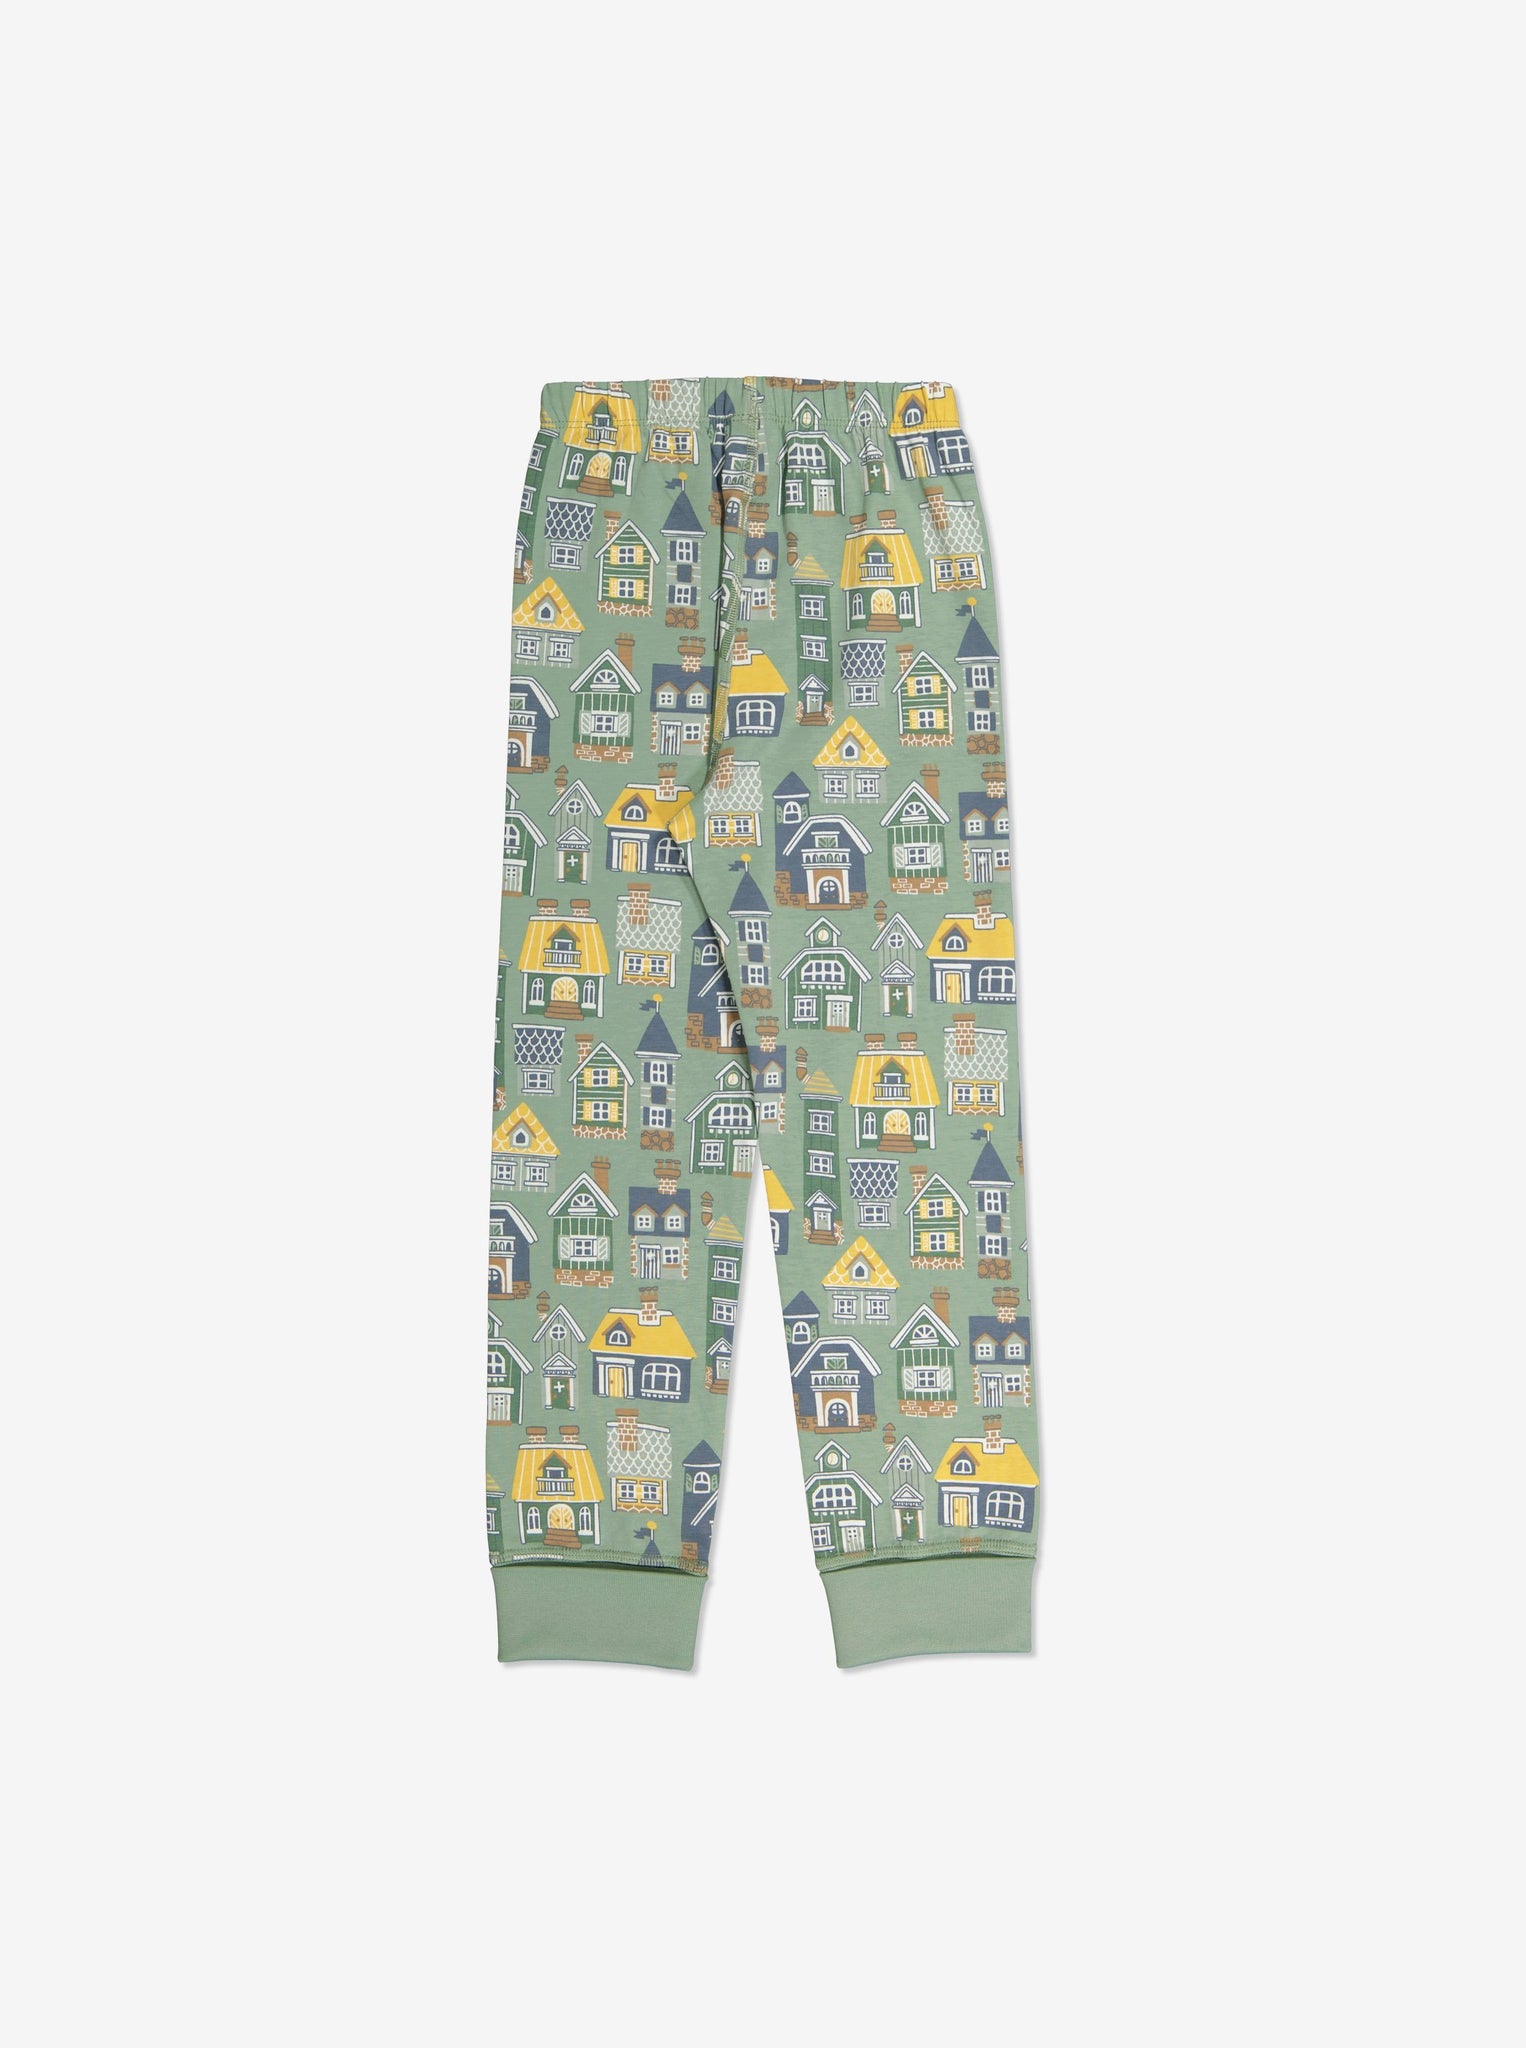  Organic Green Kids Pyjamas from Polarn O. Pyret Kidswear. Made from sustainably sourced materials.